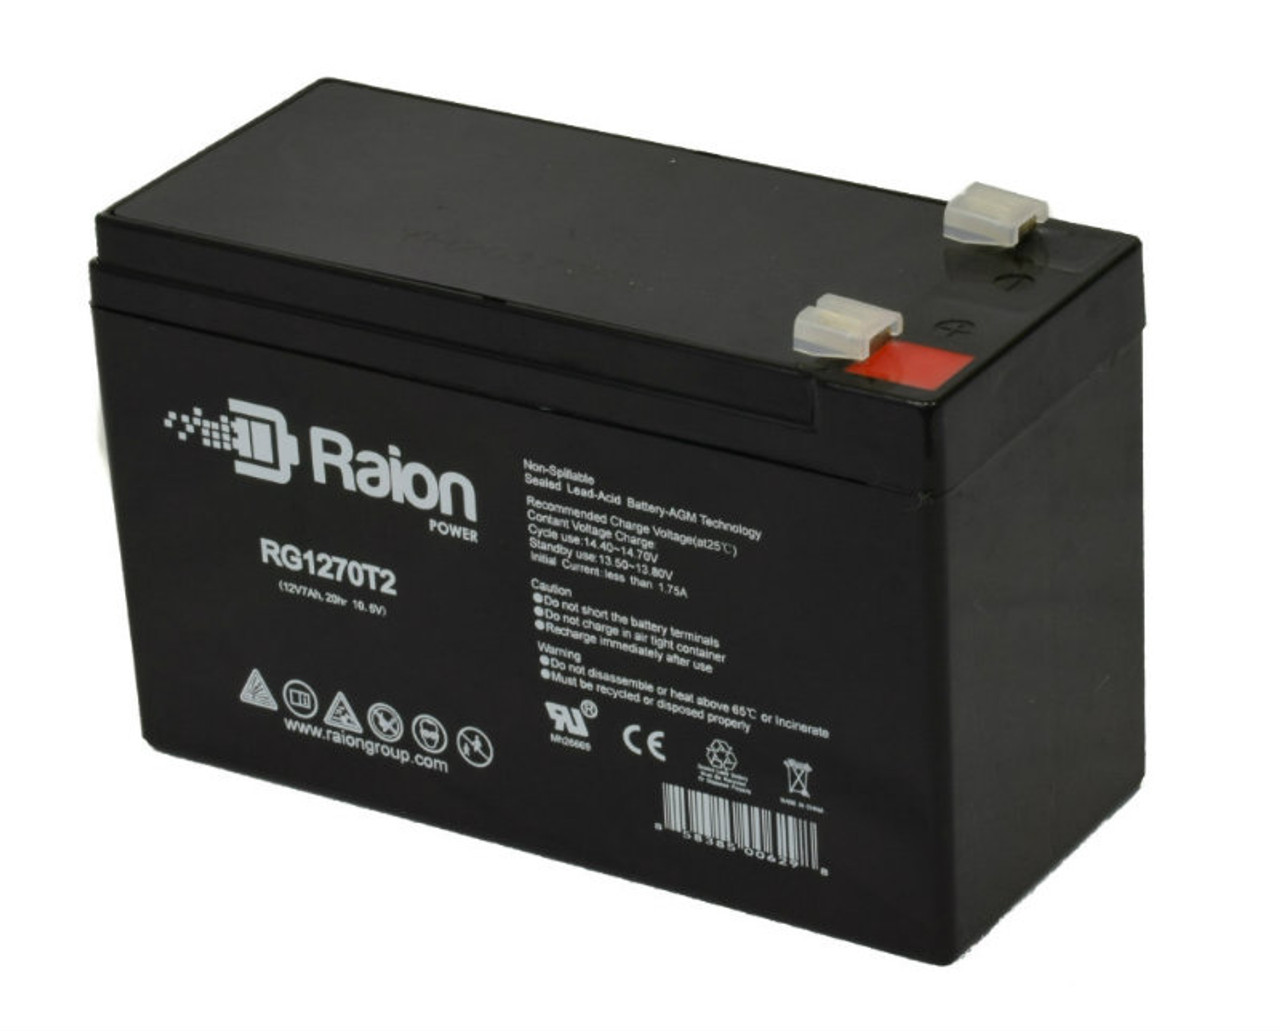 Raion Power RG1270T1 Replacement Battery for Gallagher S300